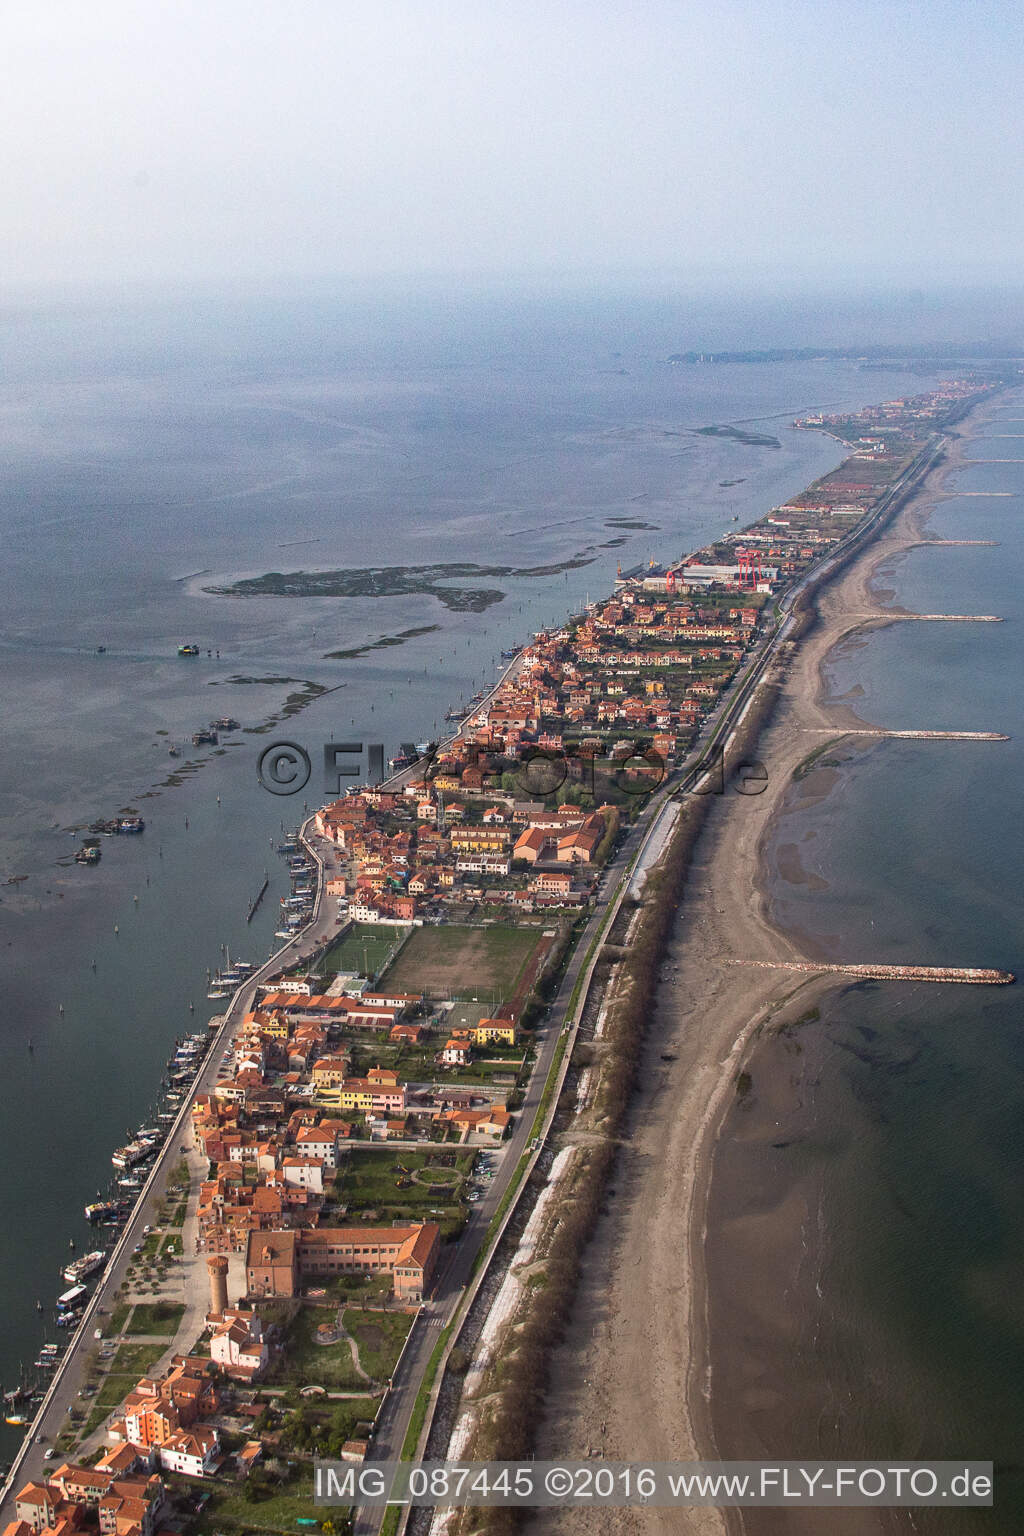 Settlement area in the district Pellestrina in Venedig in Venetien, Italy from a drone